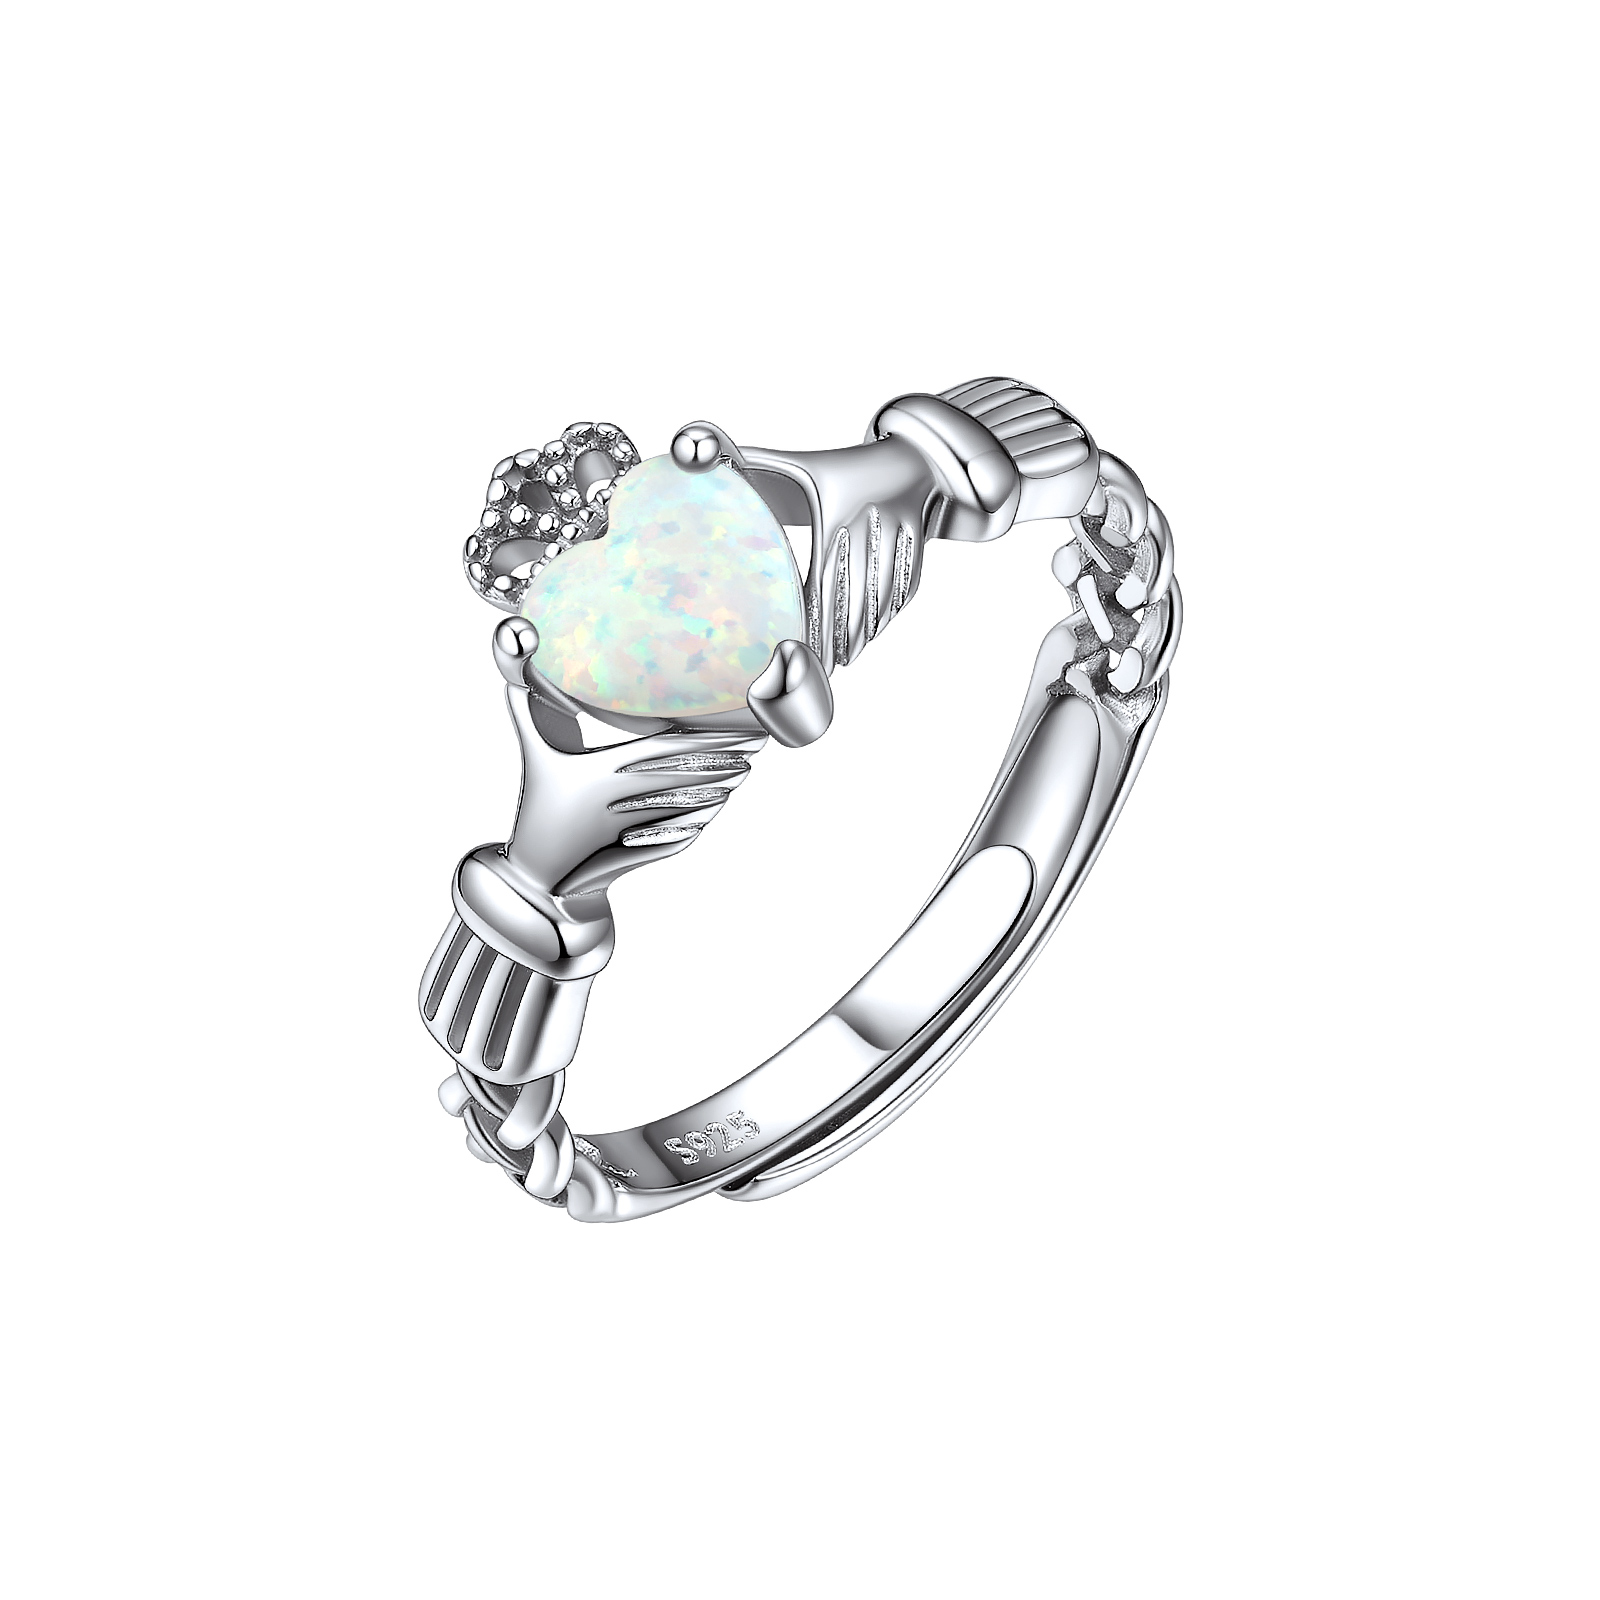 ChicSilver Claddagh Heart Opal Ring Sterling Silver